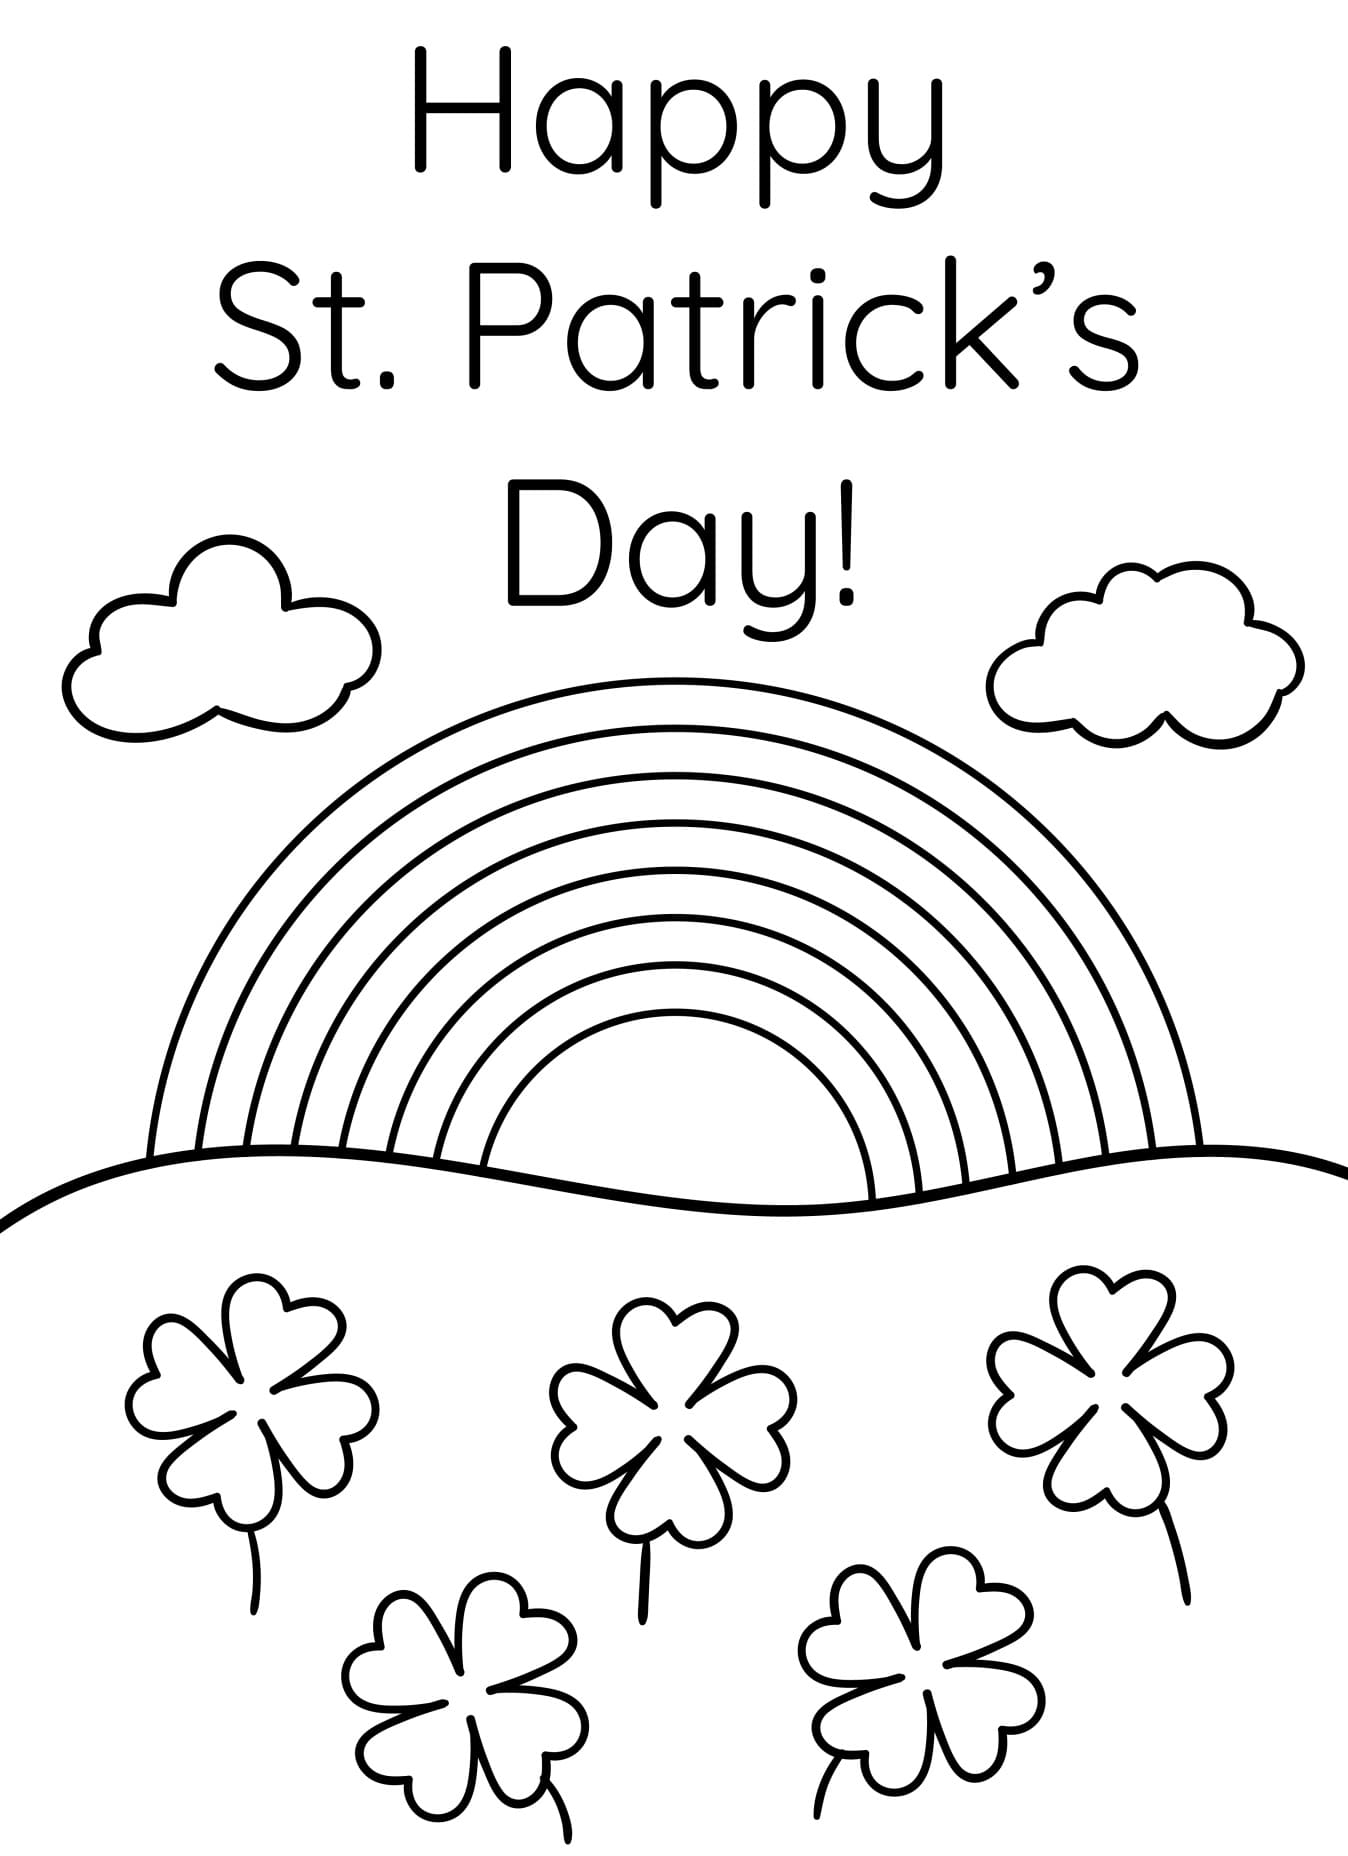 Free Happy St. Patrick's Day Coloring Page - Free Printable Coloring ...